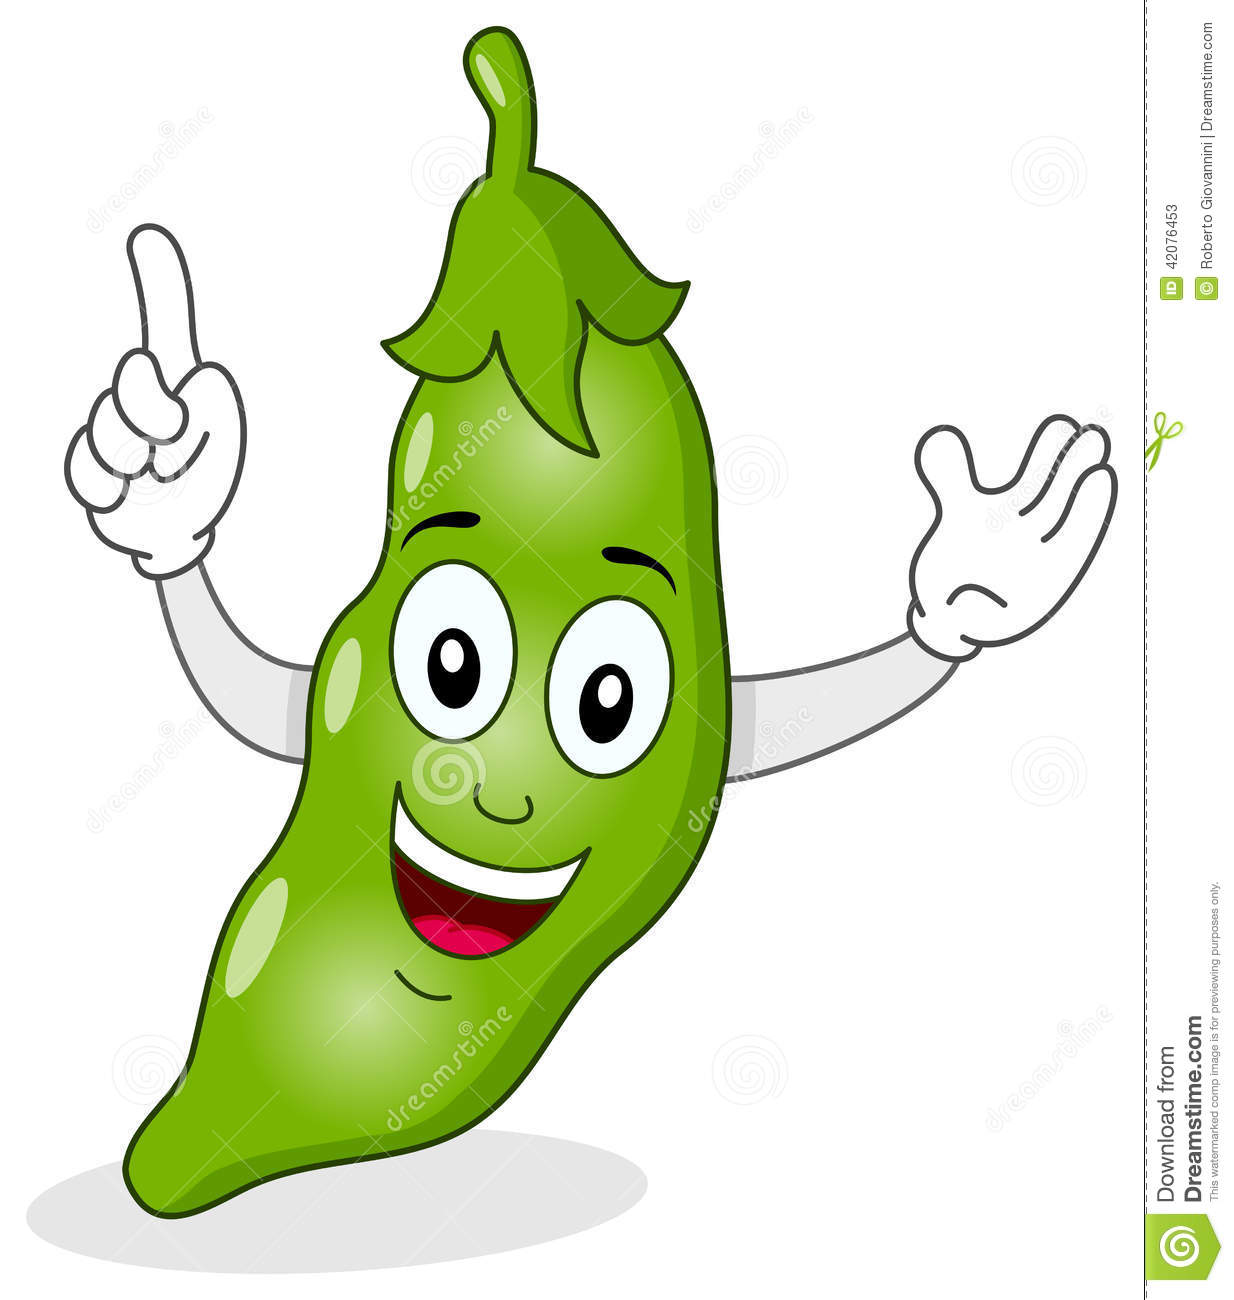 Cute Cartoon Pod Of Peas Character Smiling Isolated On White